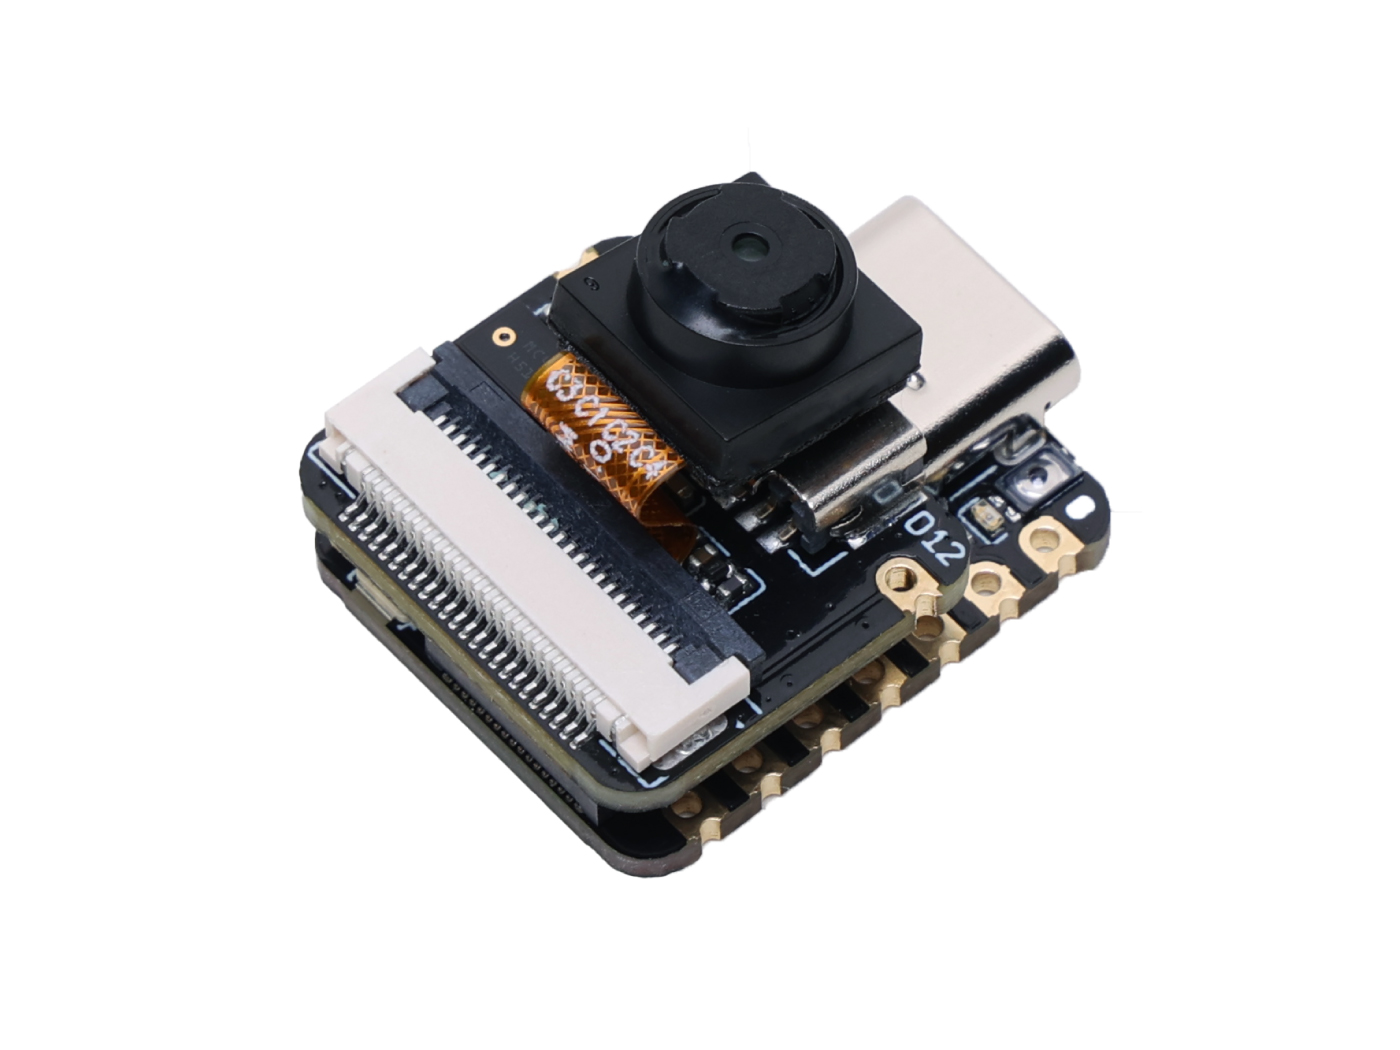 [113991115]Seeed Studio XIAO ESP32S3 Sense - 2.4GHz?Wi-Fi, BLE?5.0, OV2640 camera sensor, digital microphone, 8MB PSRAM, 8MB FLASH, battery charge supported, rich Interface, IoT, embedded ML